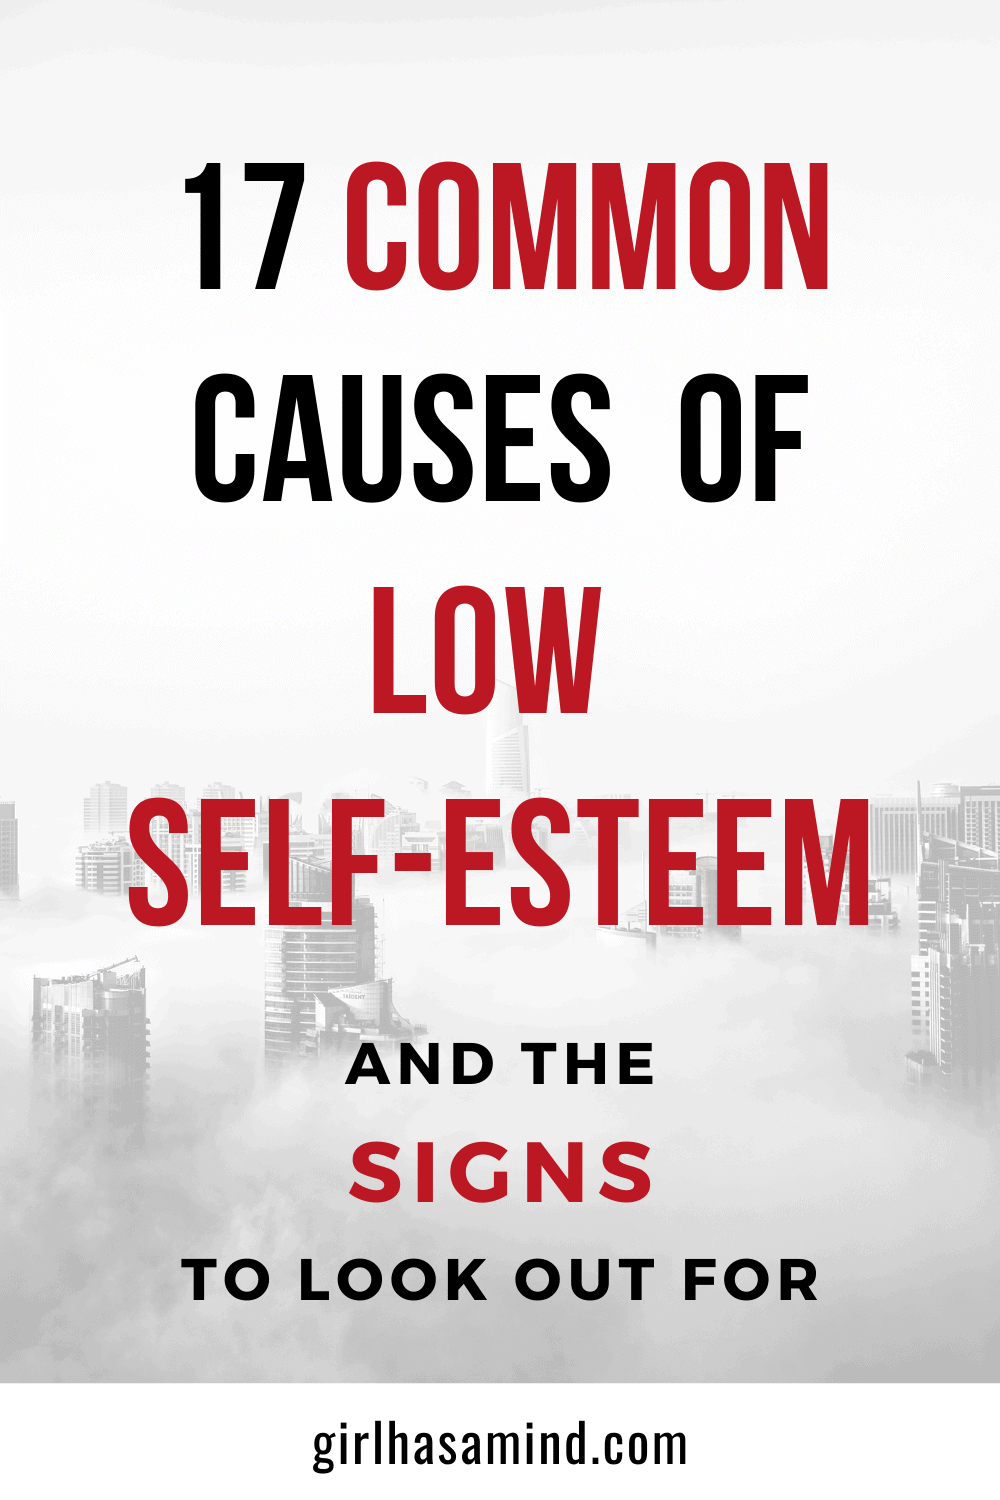 Girl Has a Mind - 17 Common Causes Of Low Self-esteem And The